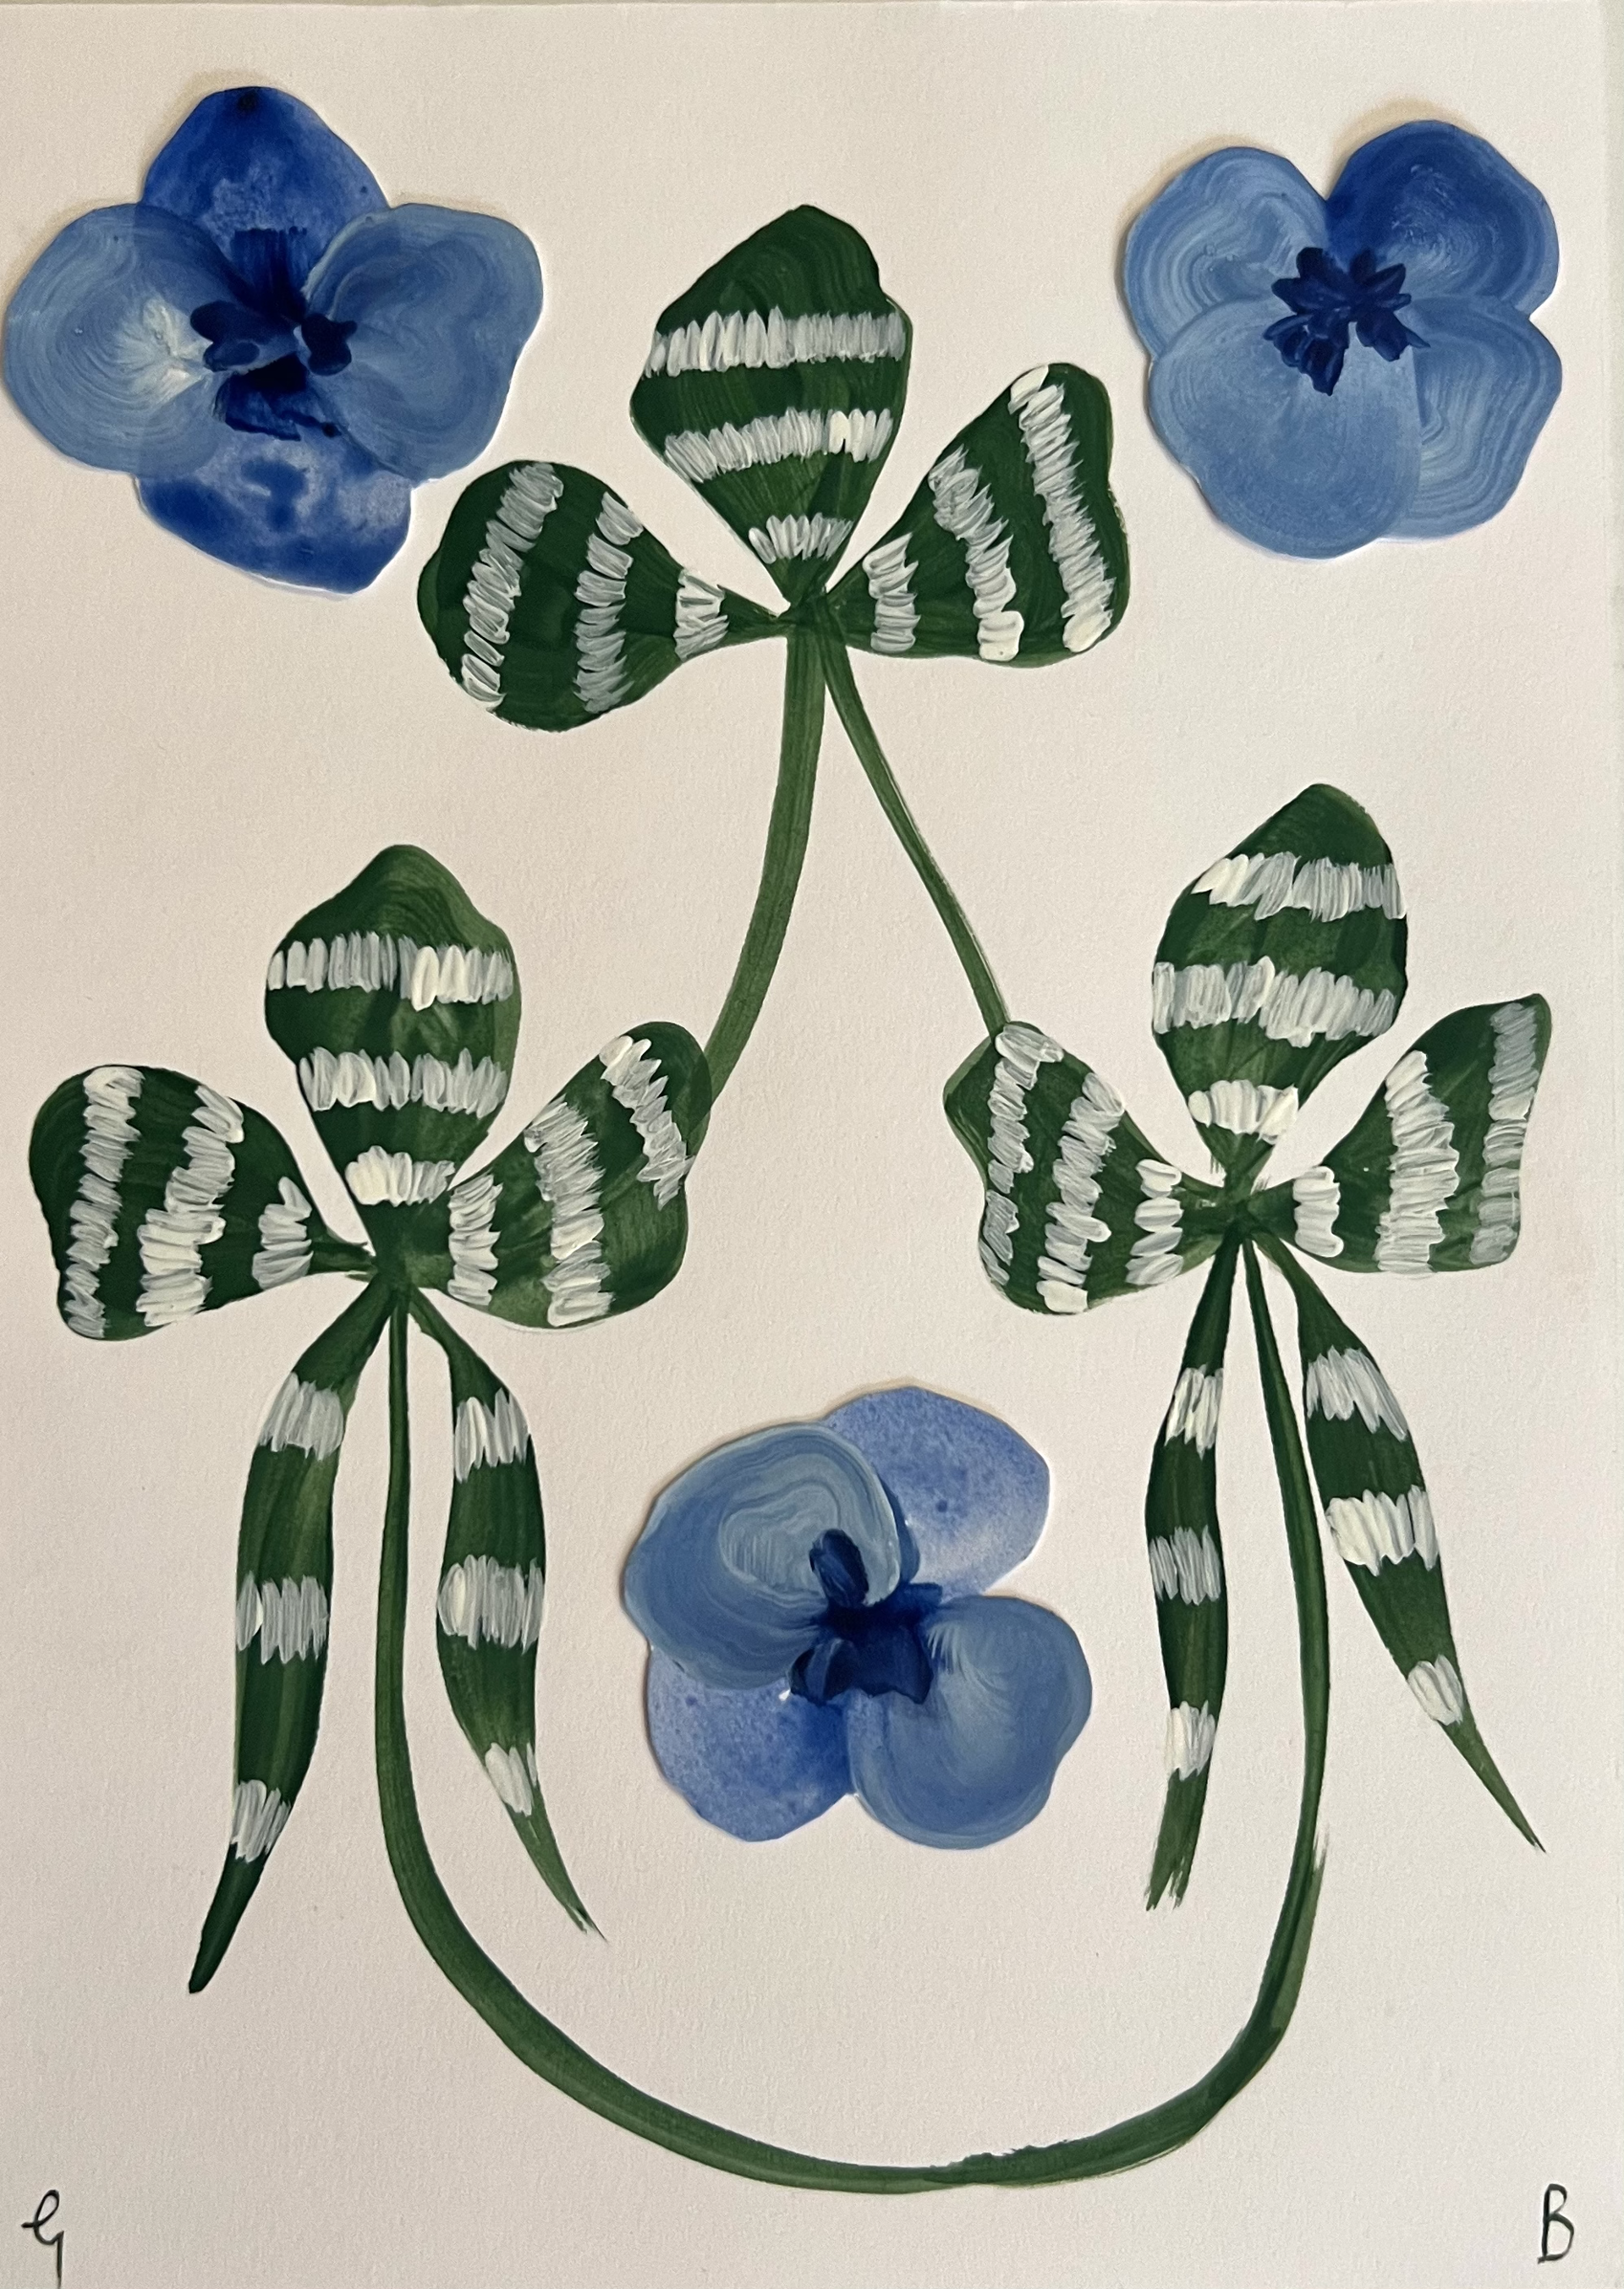 Buttercup Clover Study by Georgia Beaumont